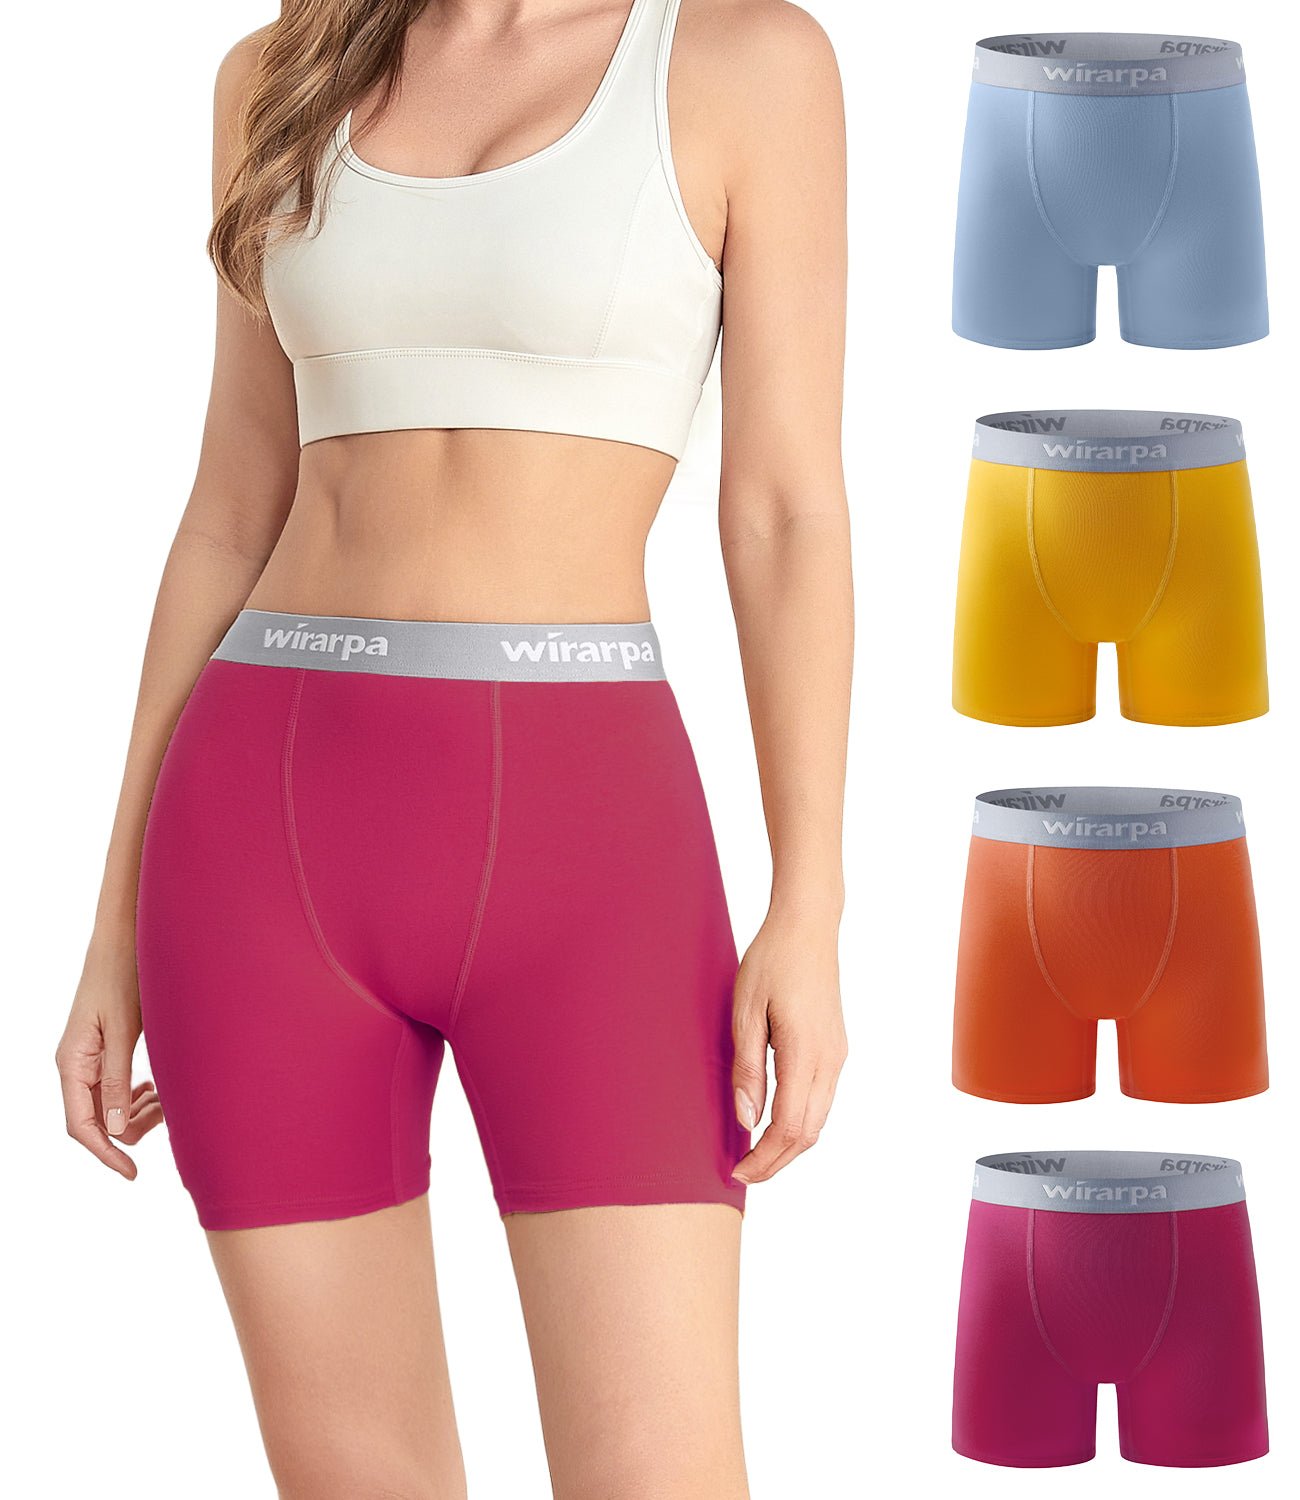 Knosfe Boy Shorts for Women Anti Chafing High Waisted Seamless